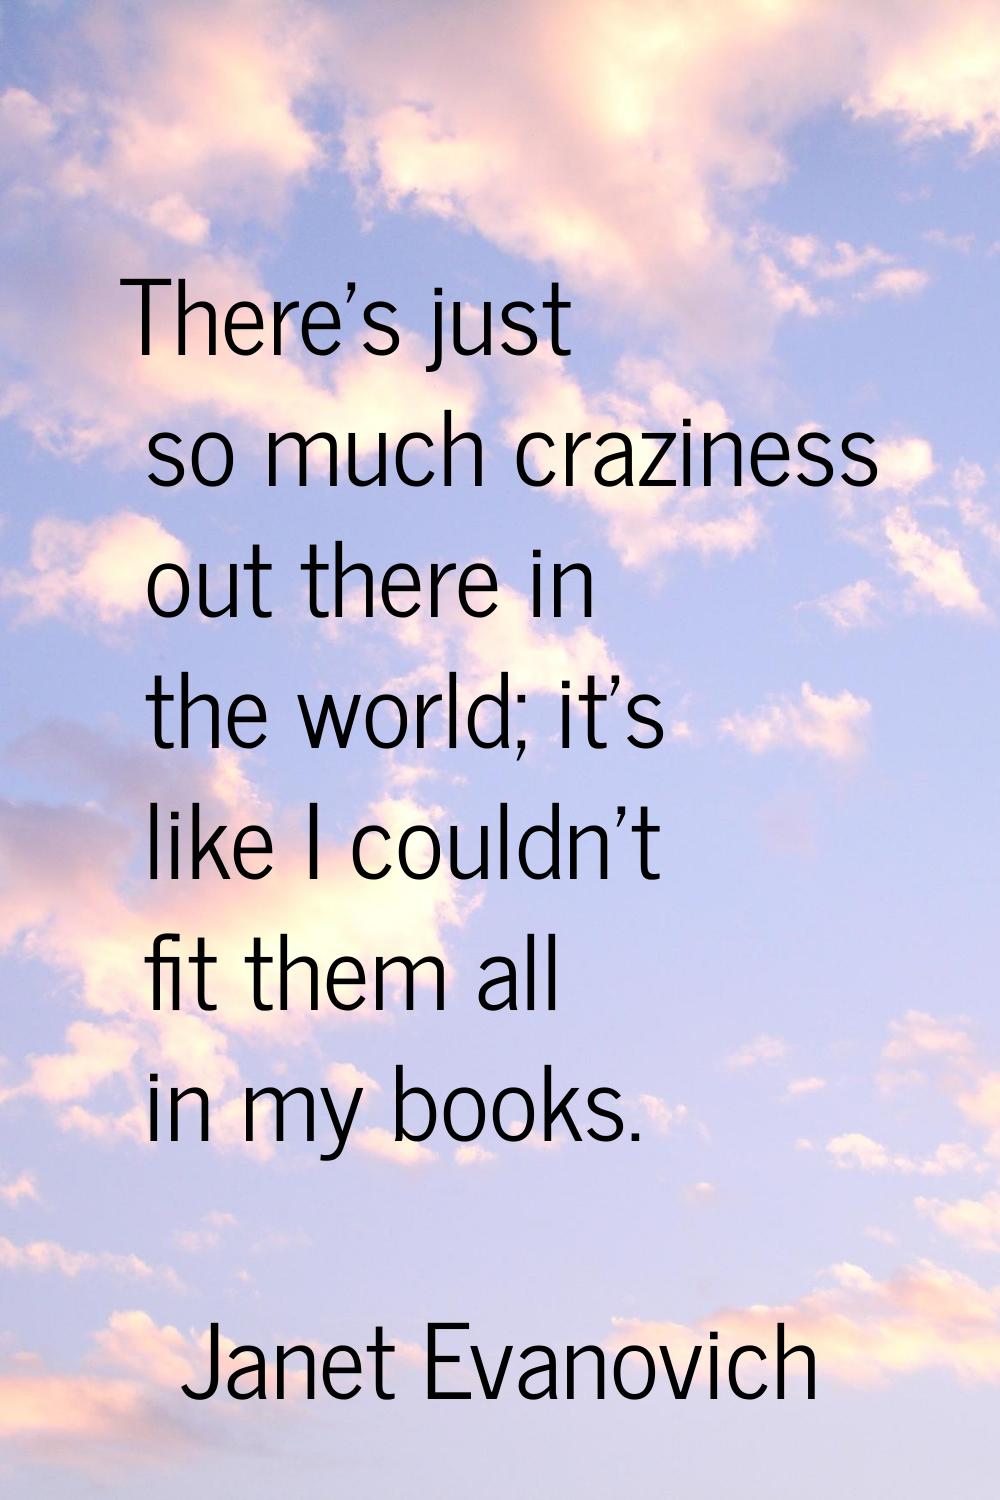 There's just so much craziness out there in the world; it's like I couldn't fit them all in my book